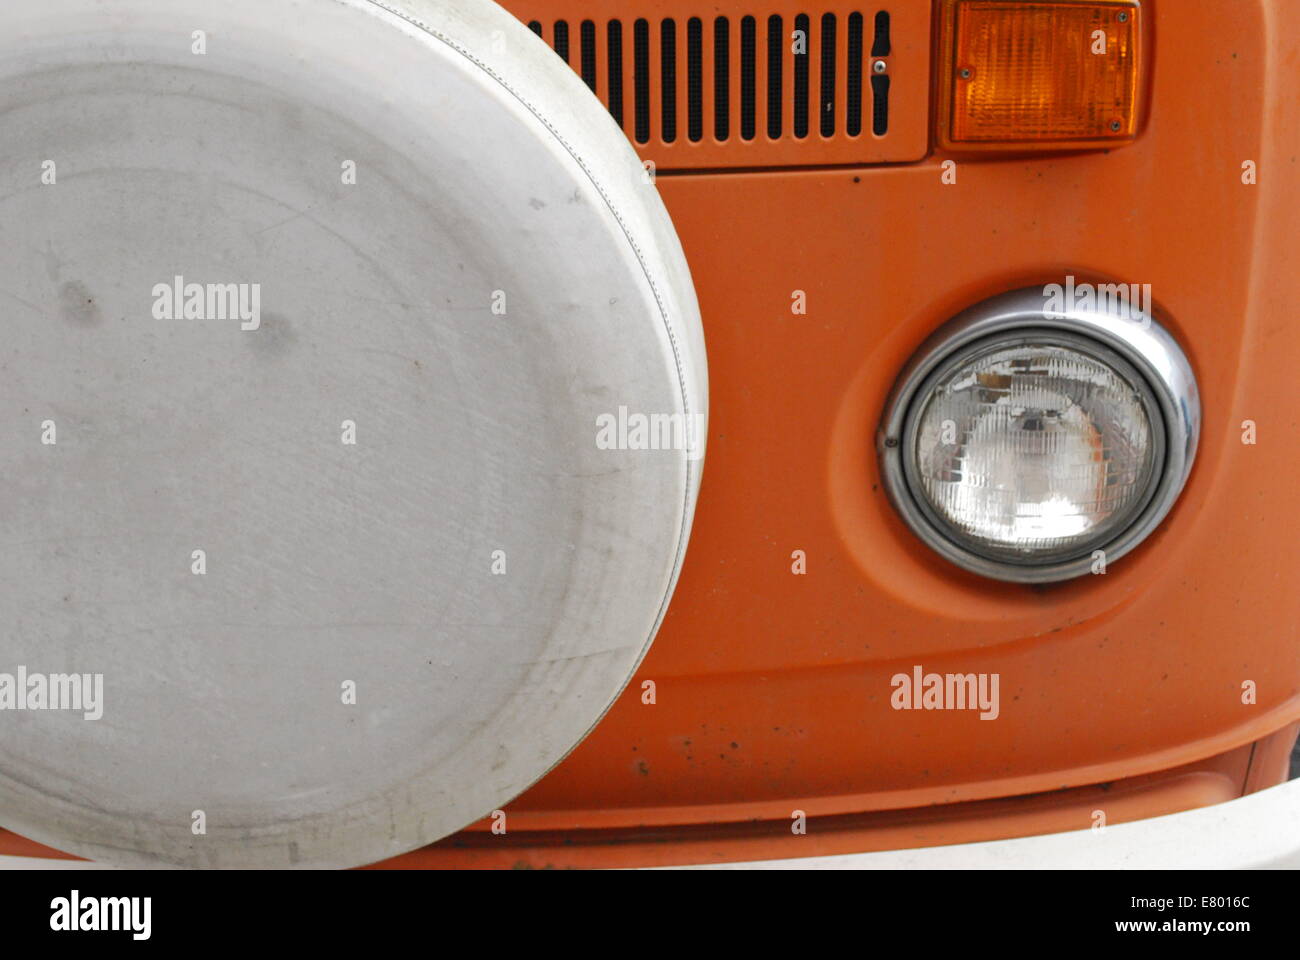 A cropped photo of a Orange Volkswagen Bus Stock Photo